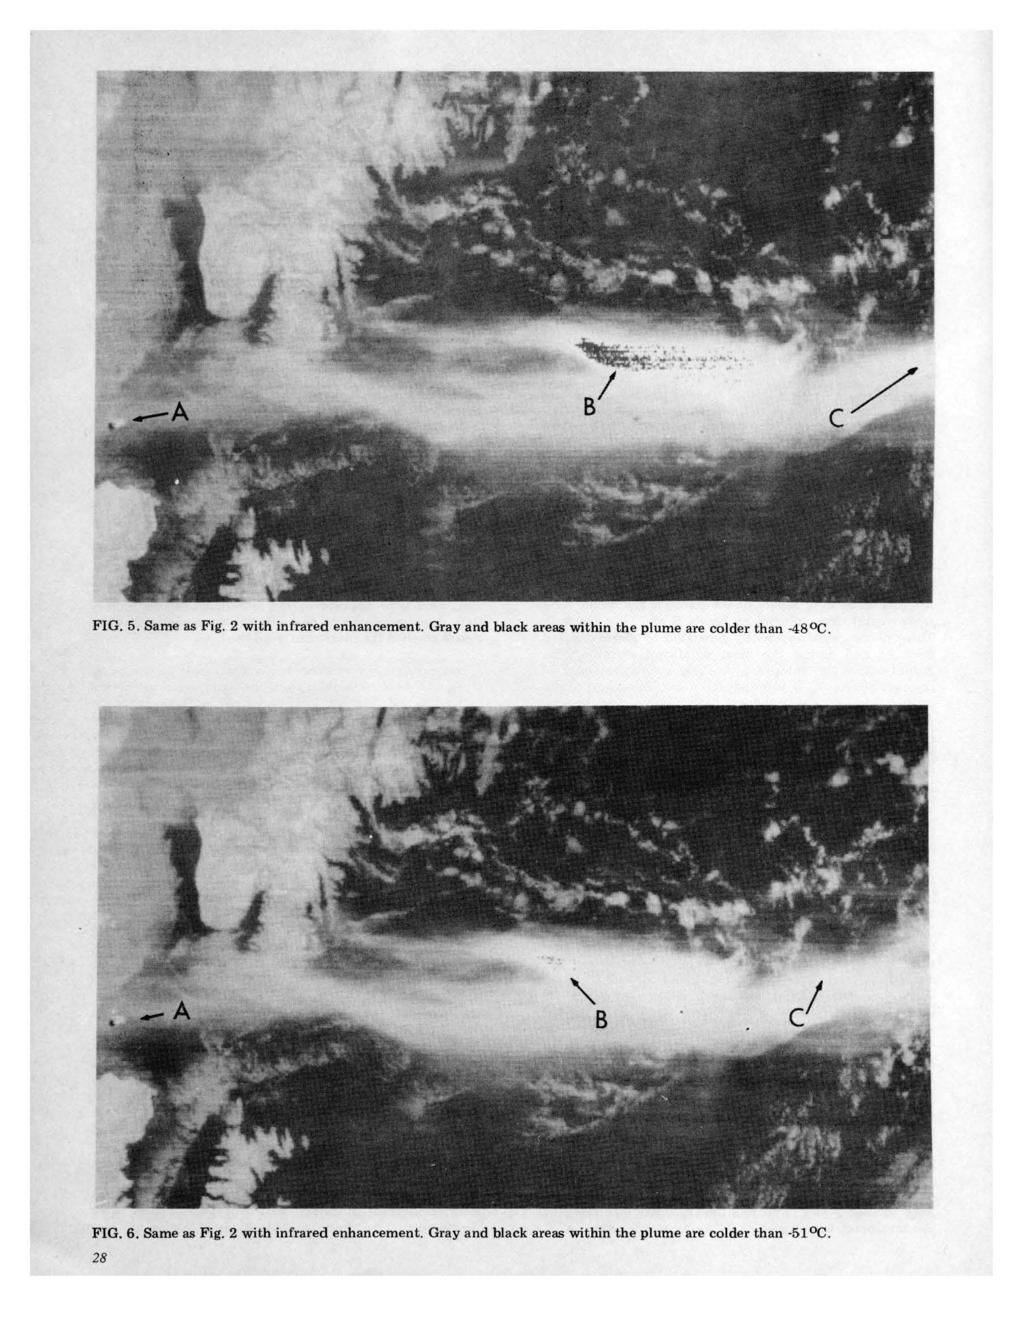 FIG. 5. Same as Fig. 2 with infrared enhancement. Gray and black areas within the plume are colder than -48 <>C.